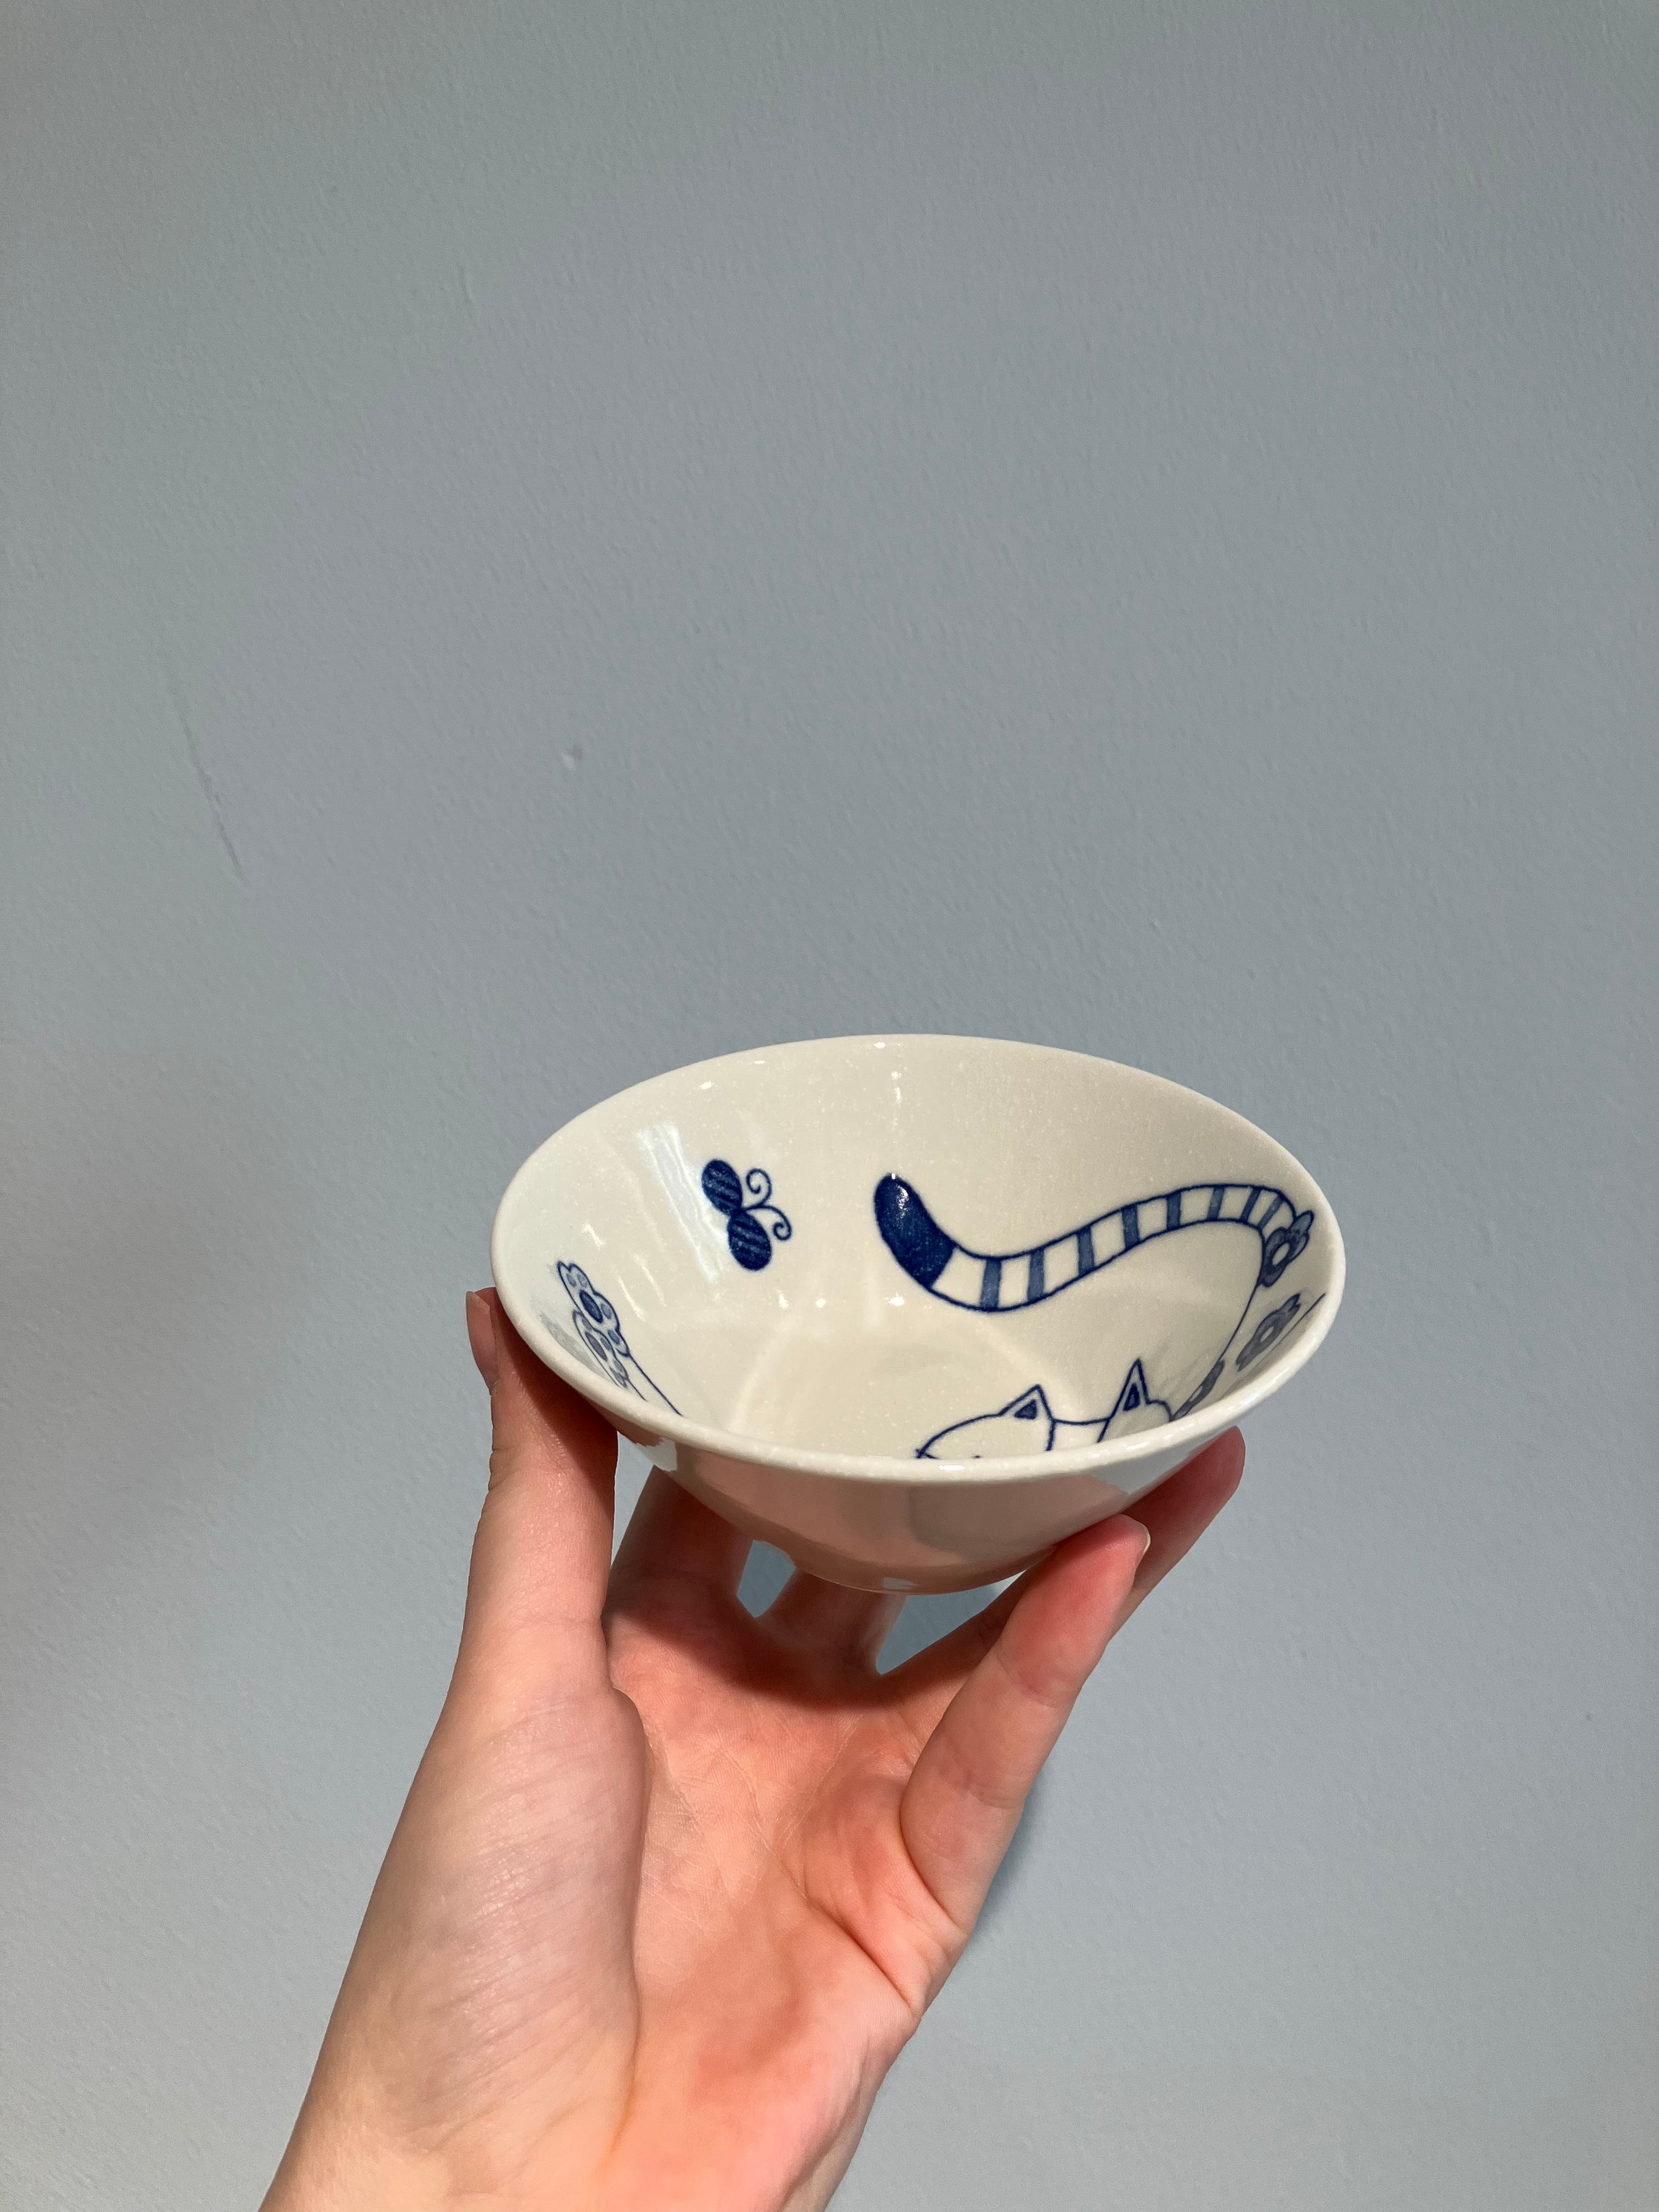 Small white bowl with blue cat stretching